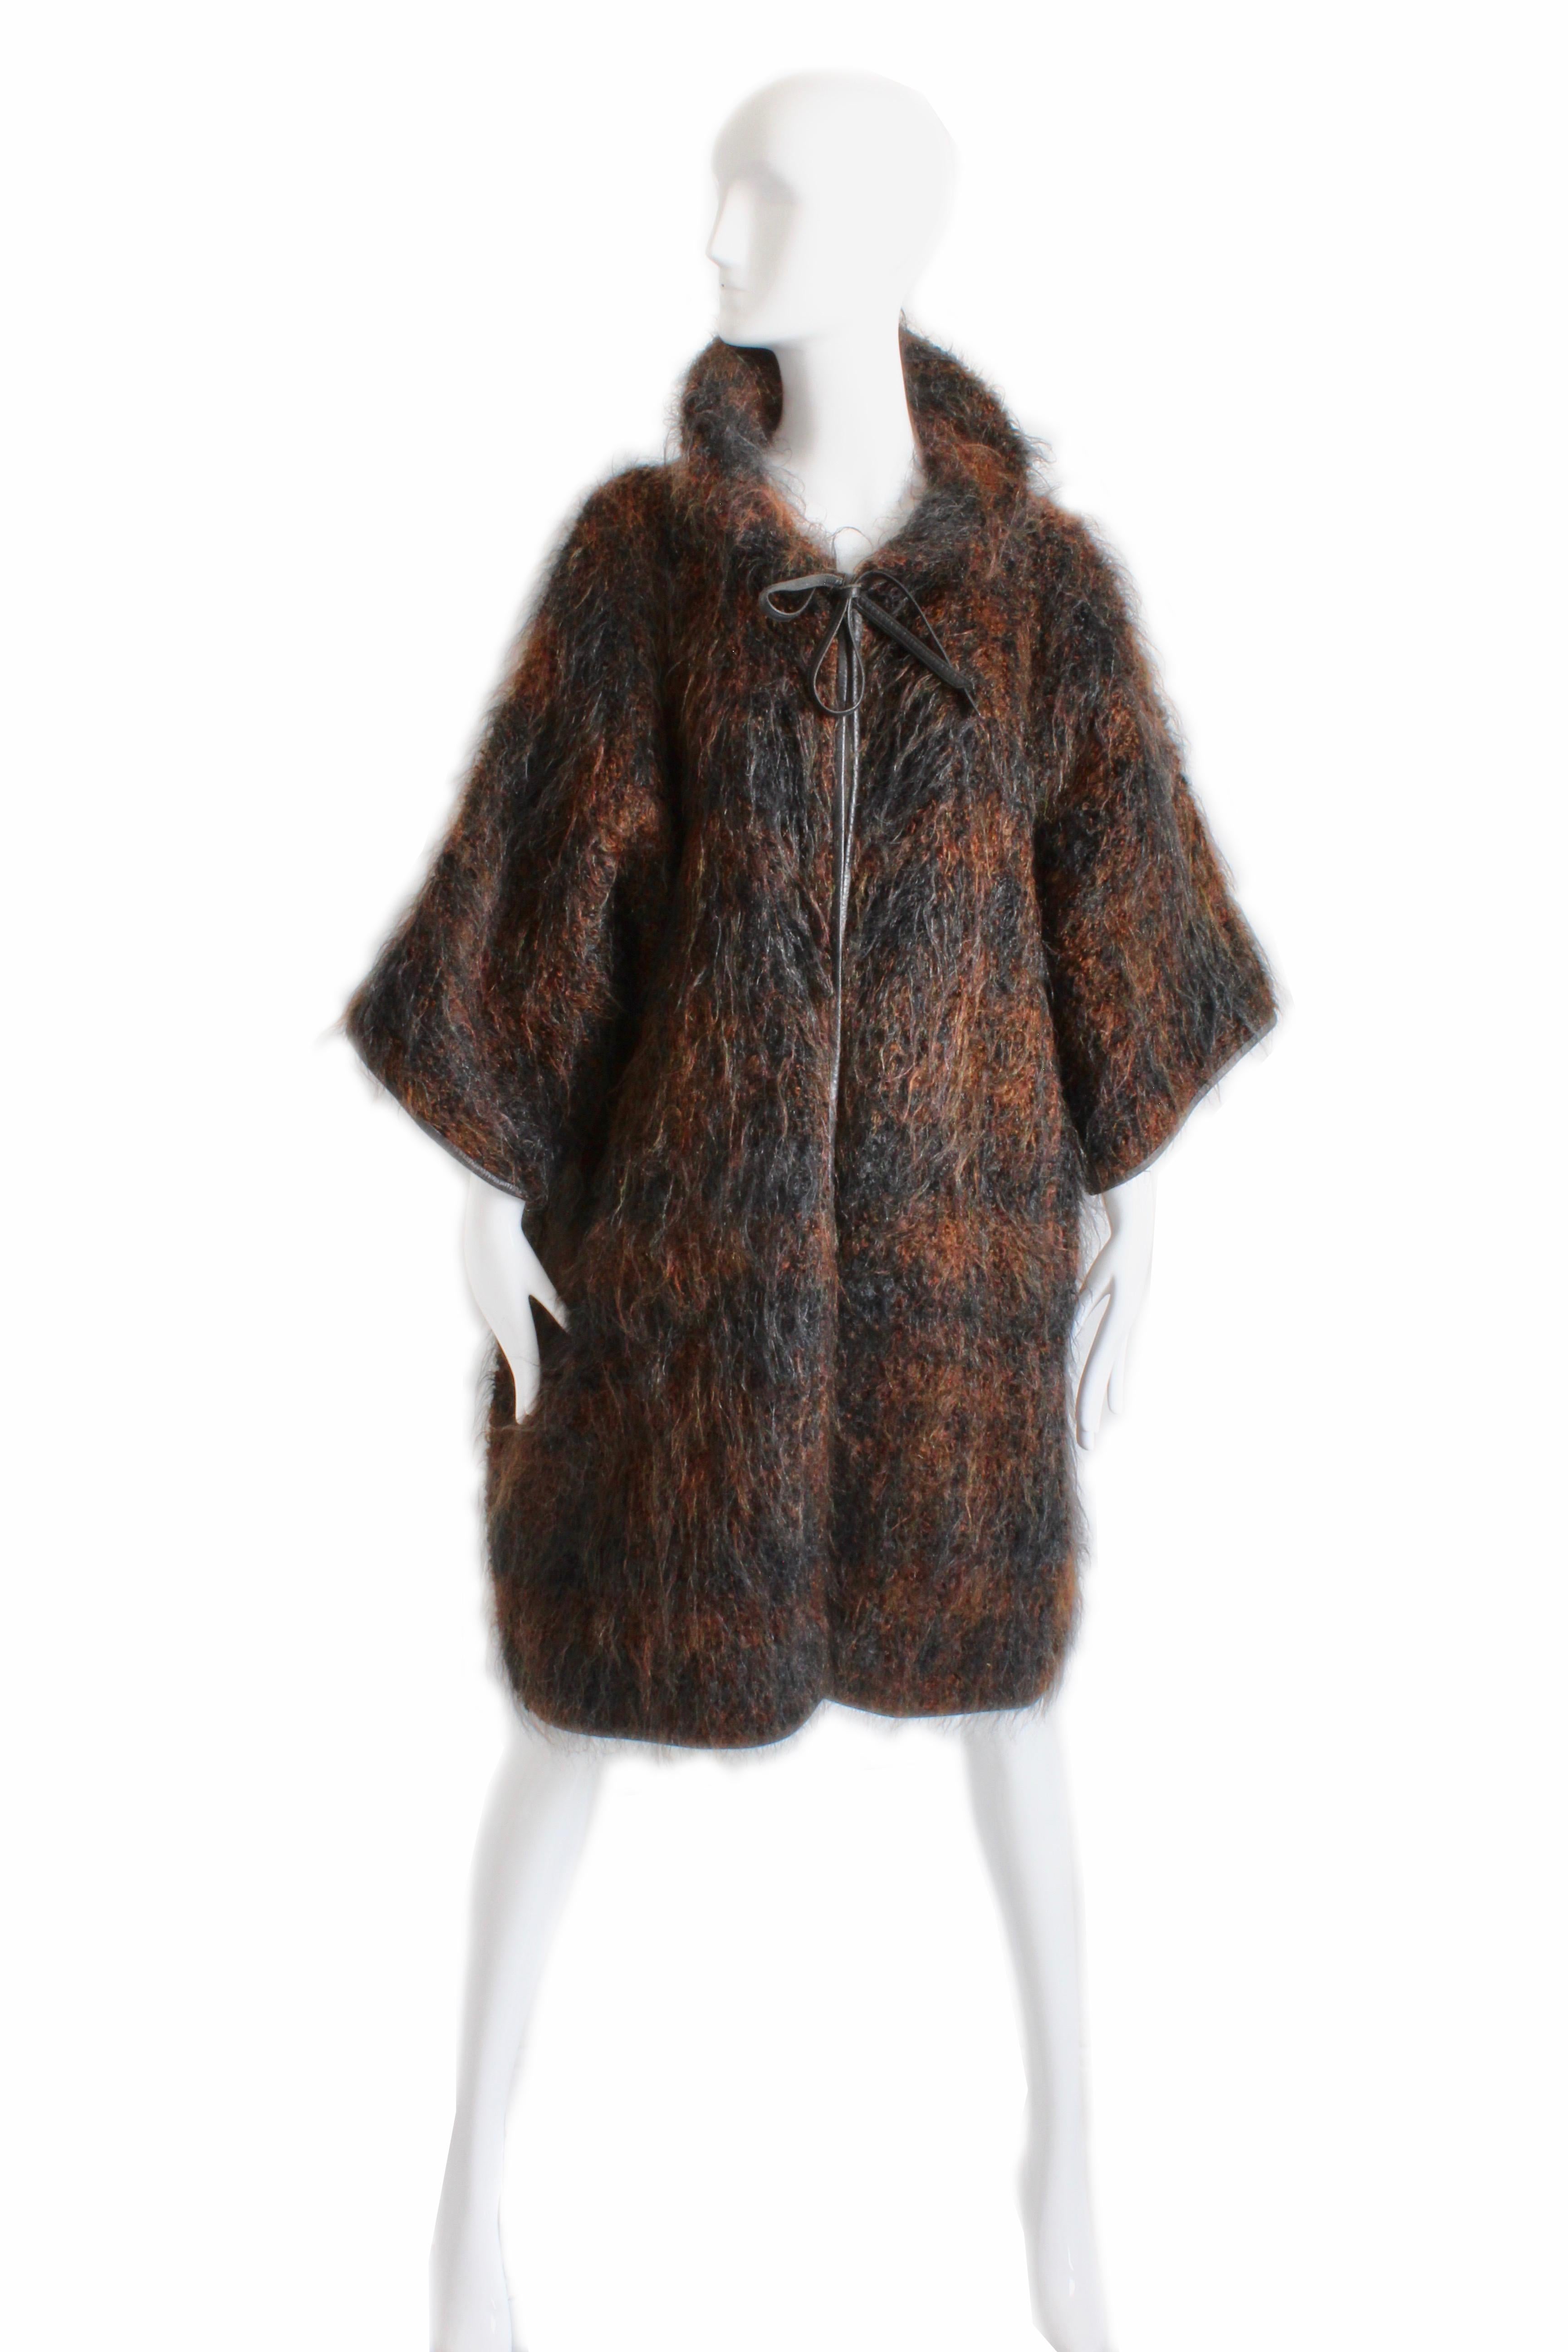 This fabulous woolly mohair coat was designed by Bonnie Cashin during her time at Sills circa 1957. The same style Noh coat that is at the FIDM Museum collection (google search Bonnie Cashin mohair NOH coat FIDM and you'll see it online) and is a